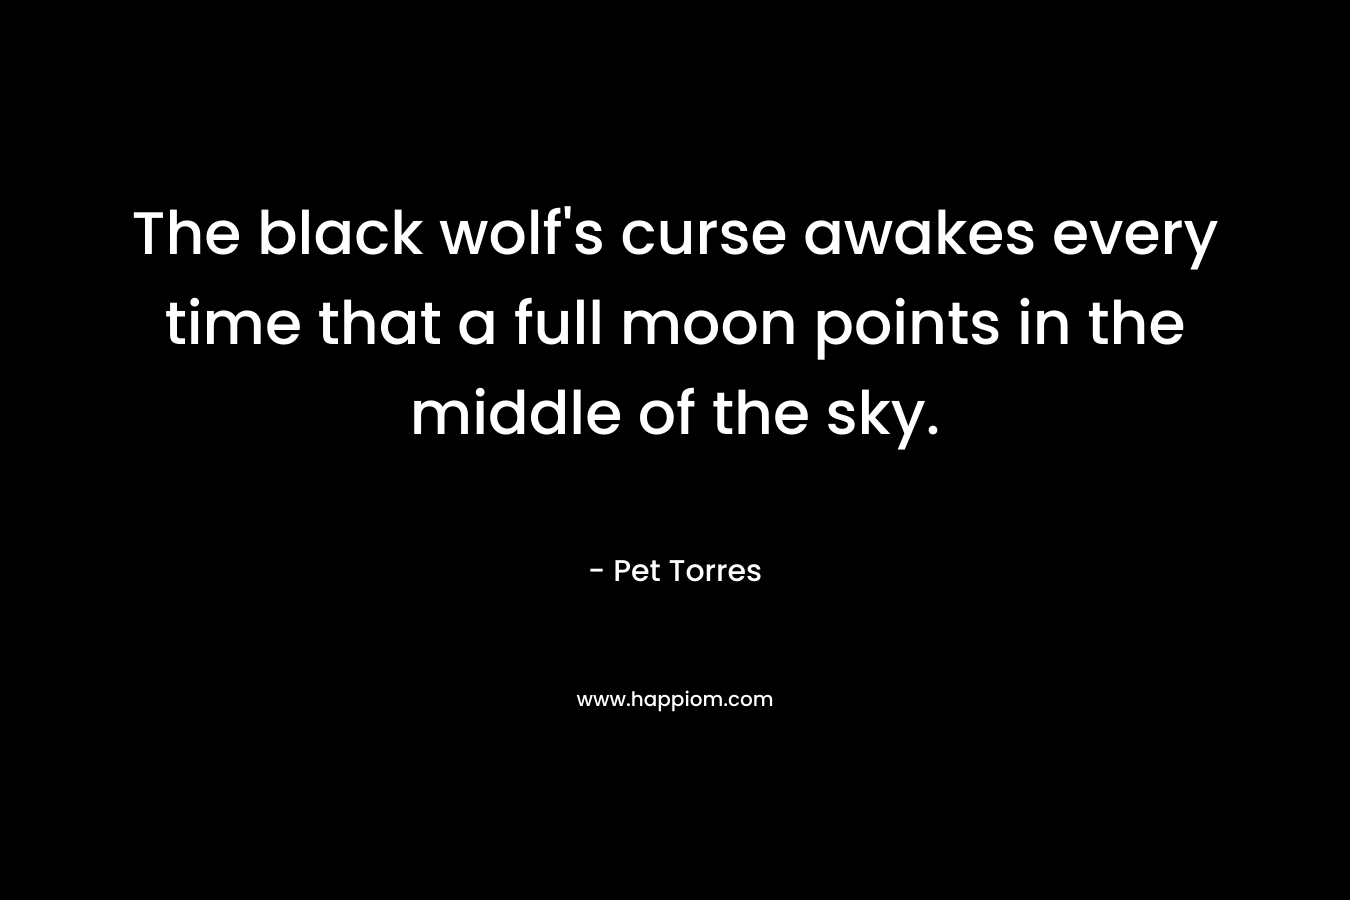 The black wolf’s curse awakes every time that a full moon points in the middle of the sky. – Pet Torres